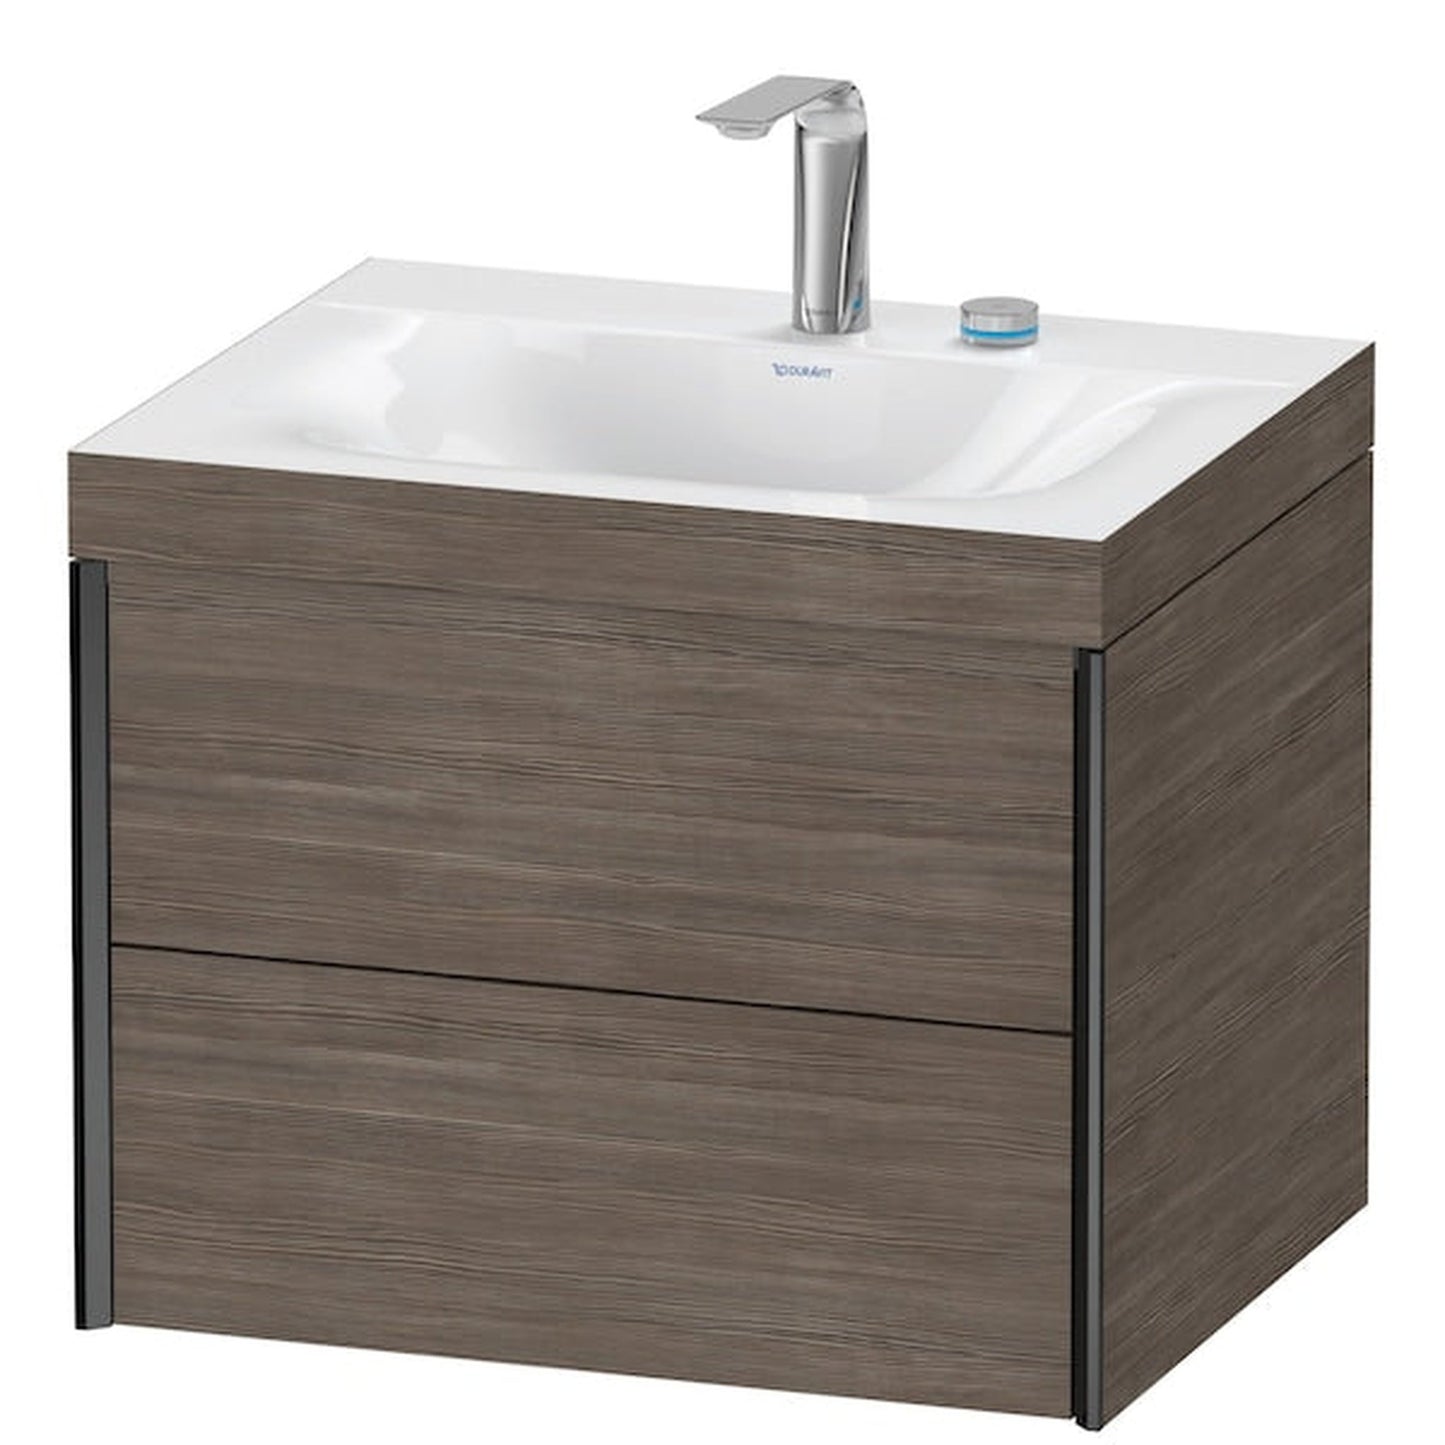 Duravit Xviu 24" x 20" x 19" Two Drawer C-Bonded Wall-Mount Vanity Kit With Two Tap Holes, Pine Terra (XV4614EB251C)